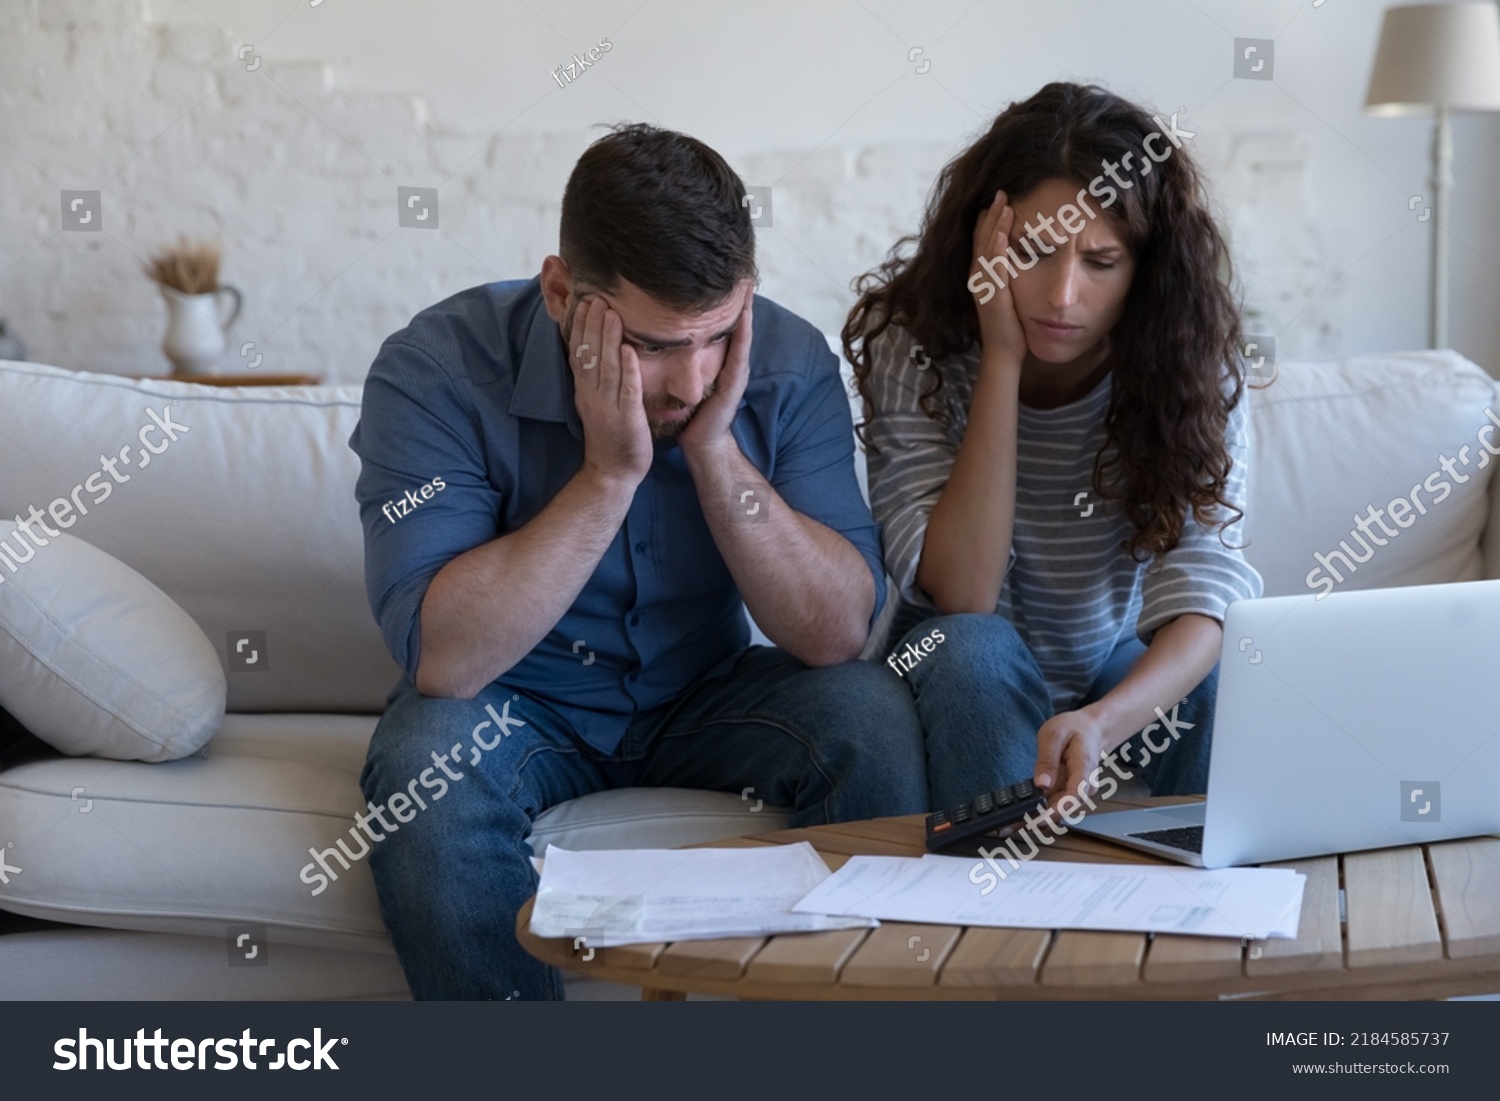 Concerned upset millennial couple counting overspent budget, doing paperwork, thinking on financial problems, high mortgage, rental fees, bad loan conditions, bankruptcy, eviction notice #2184585737